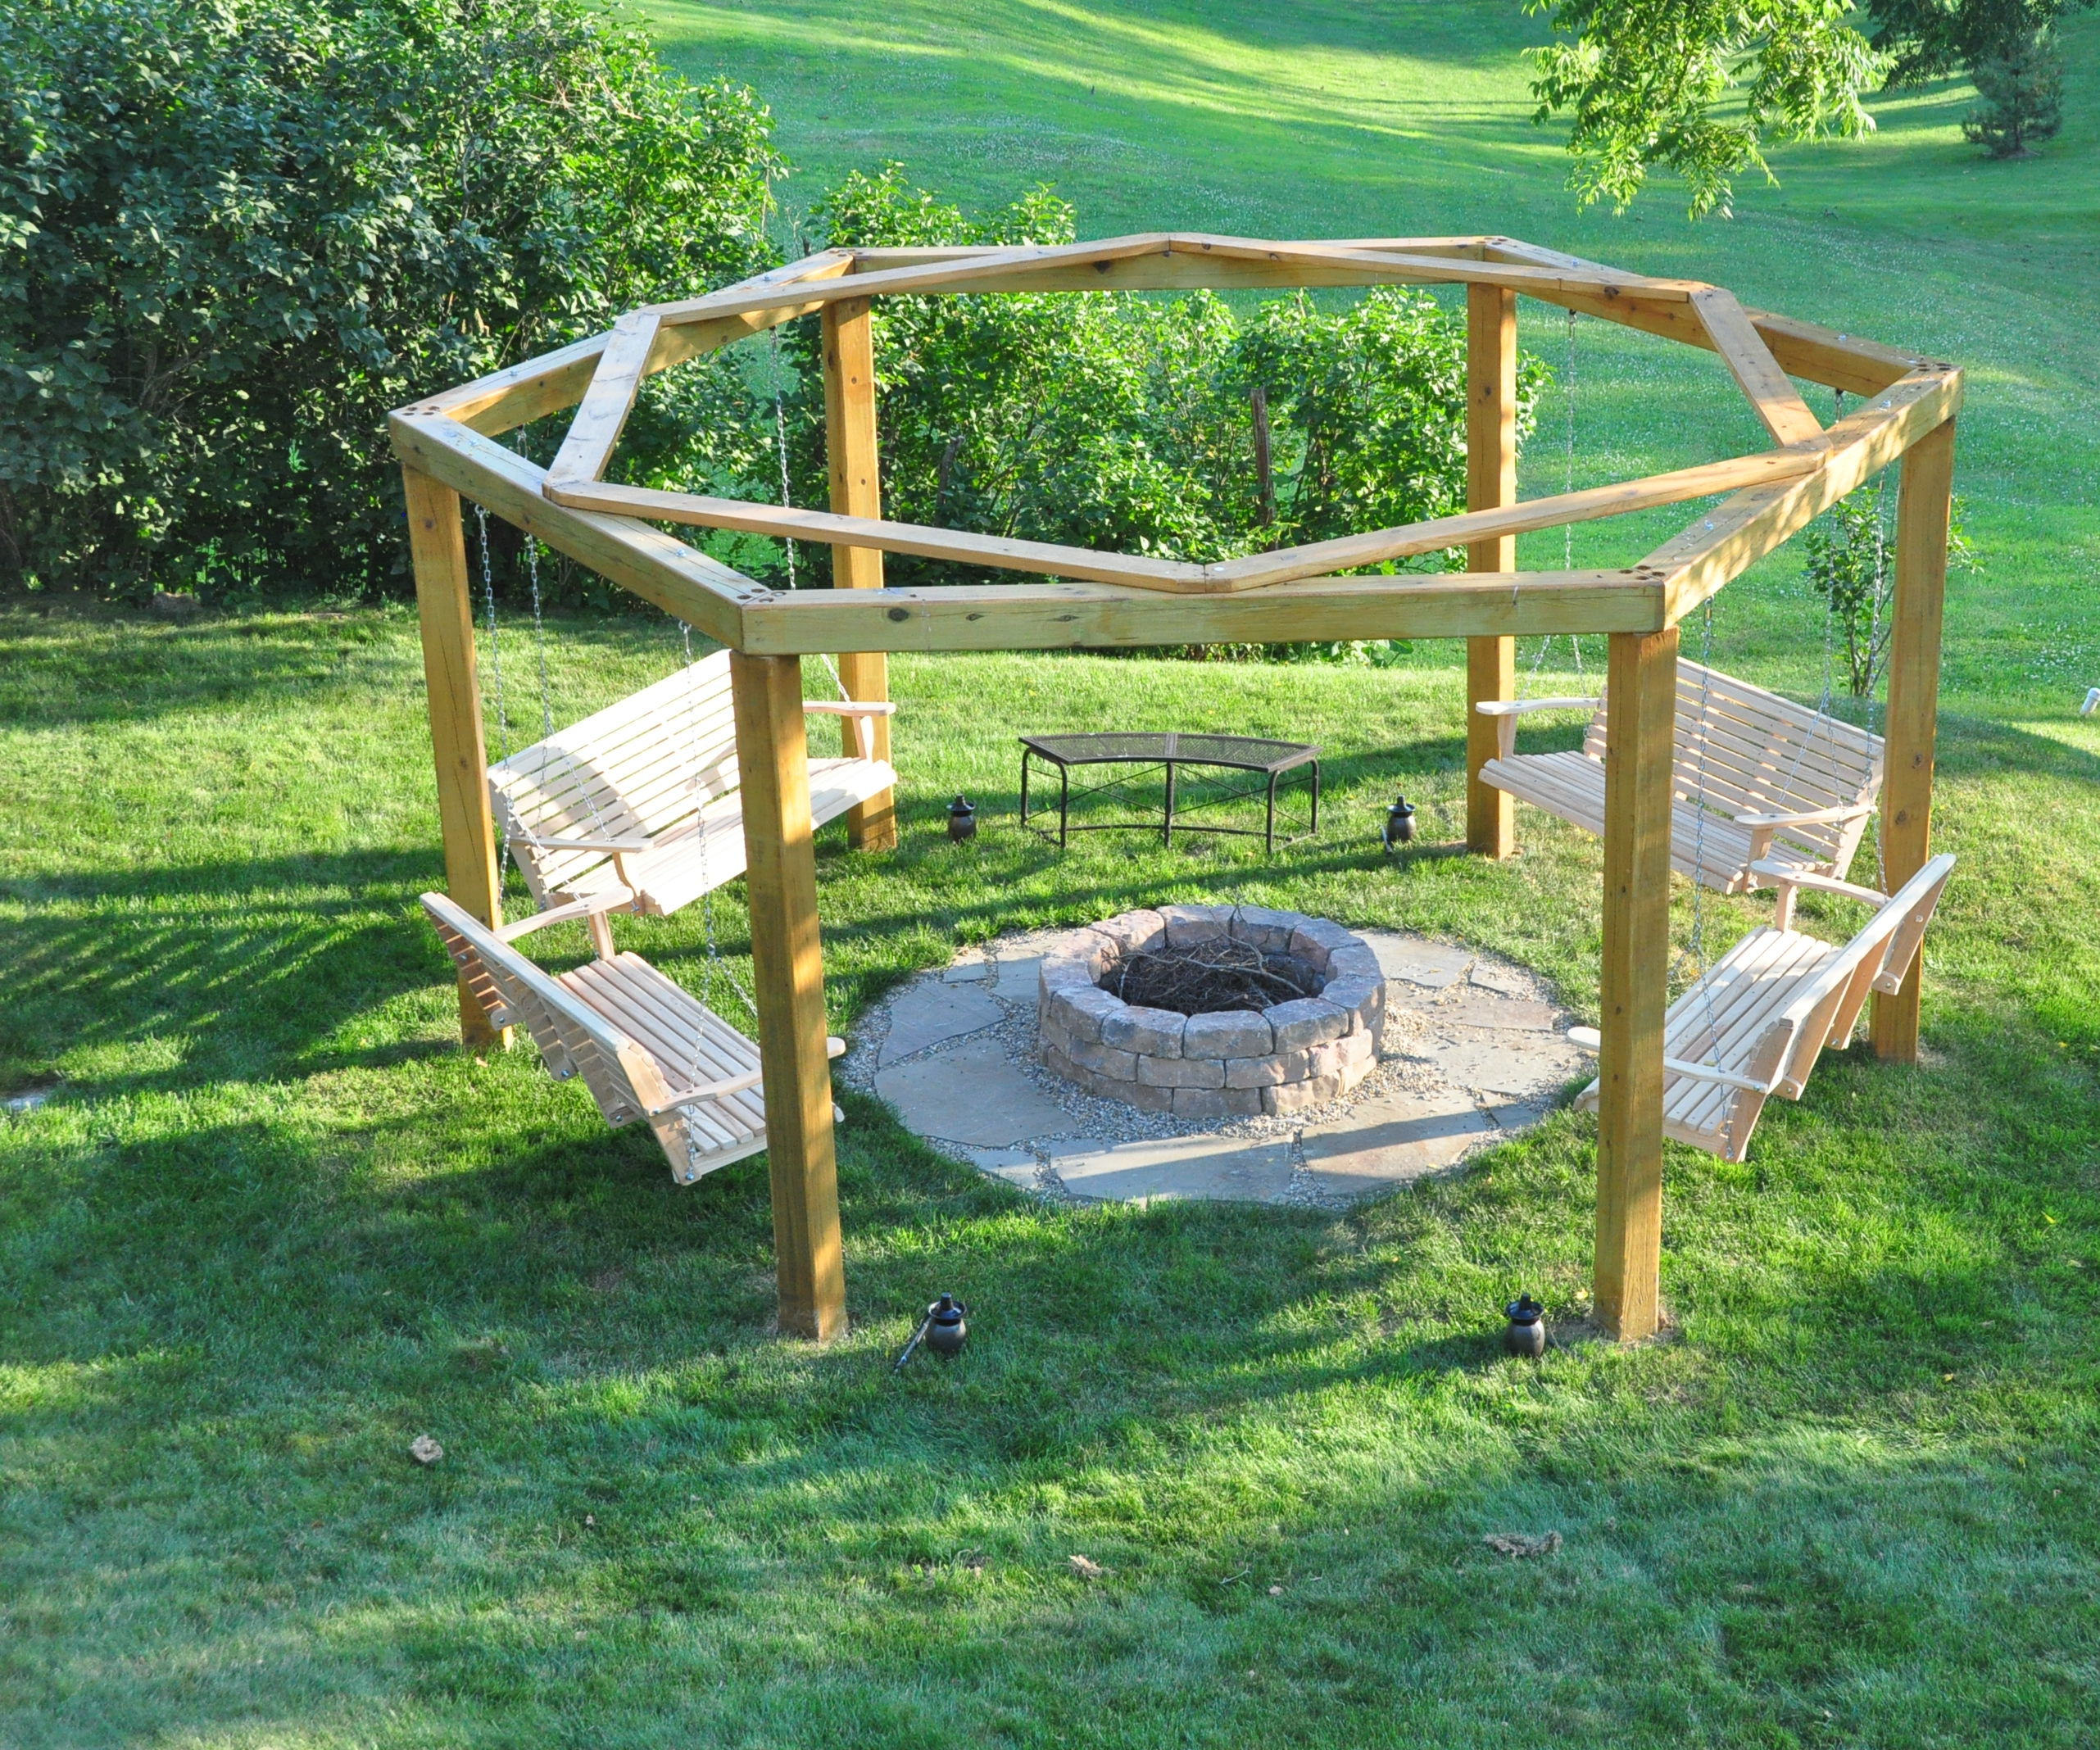 Porch-Swing Fire Pit